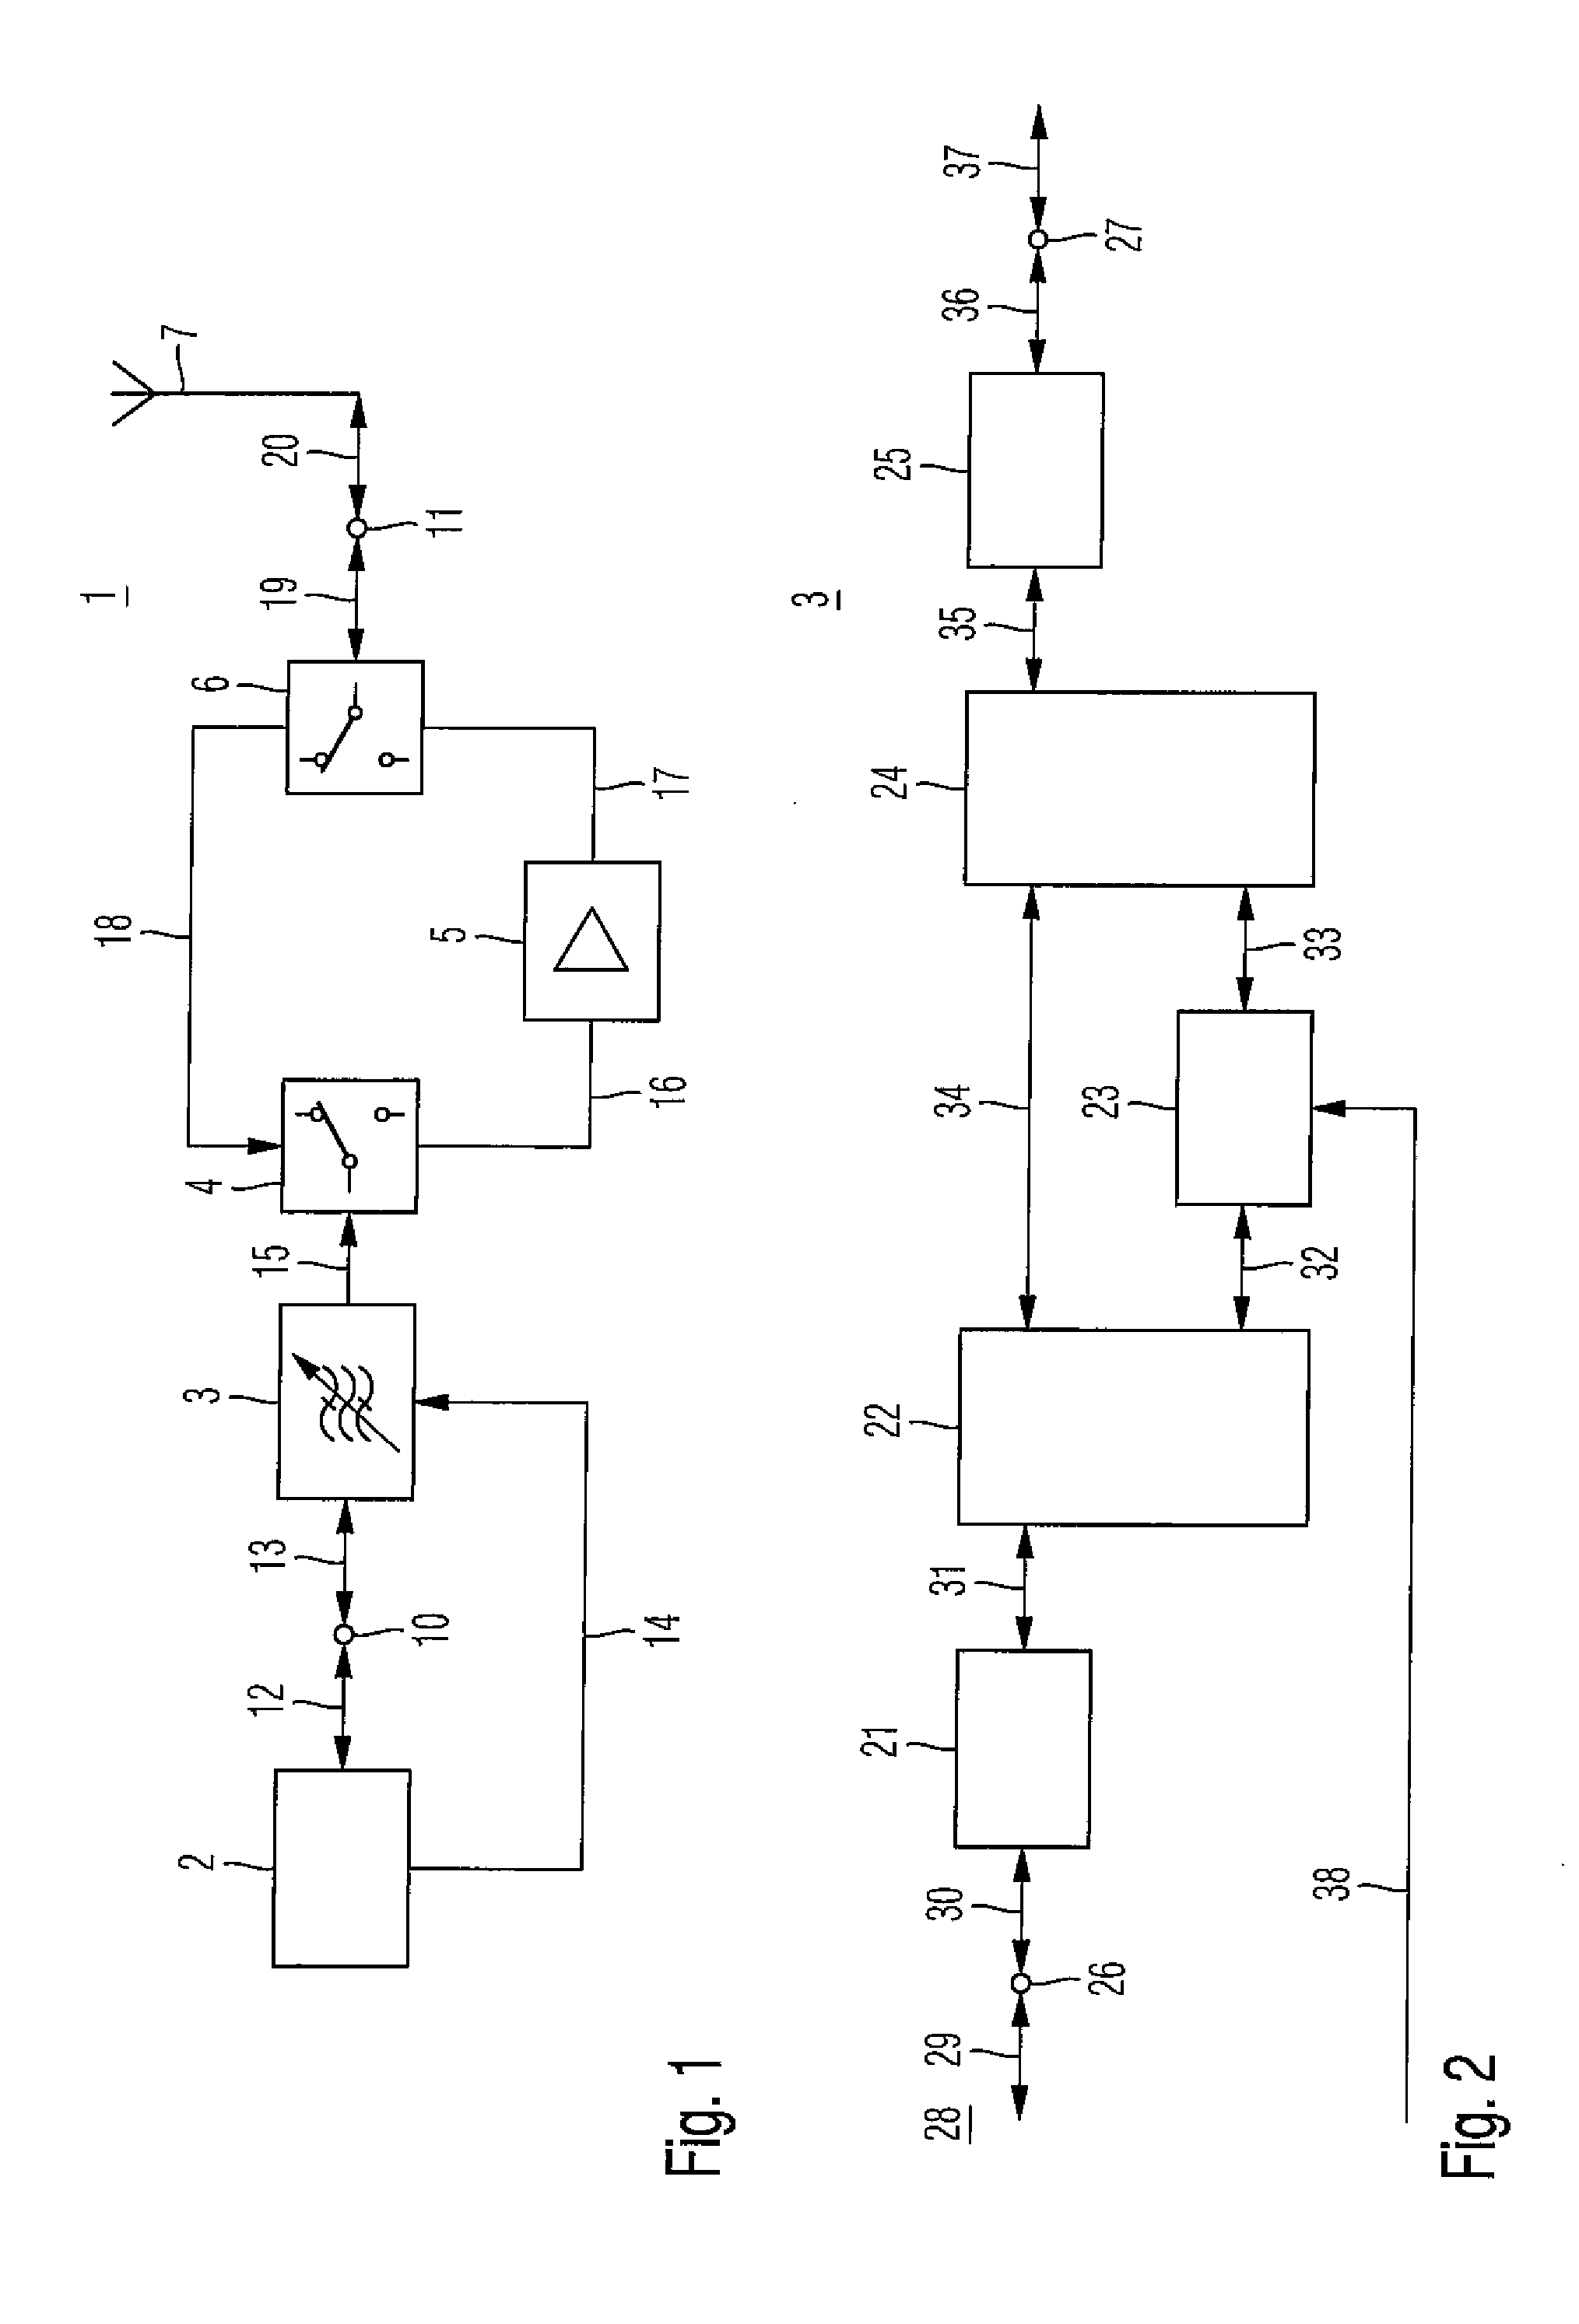 Switchable band-pass filter